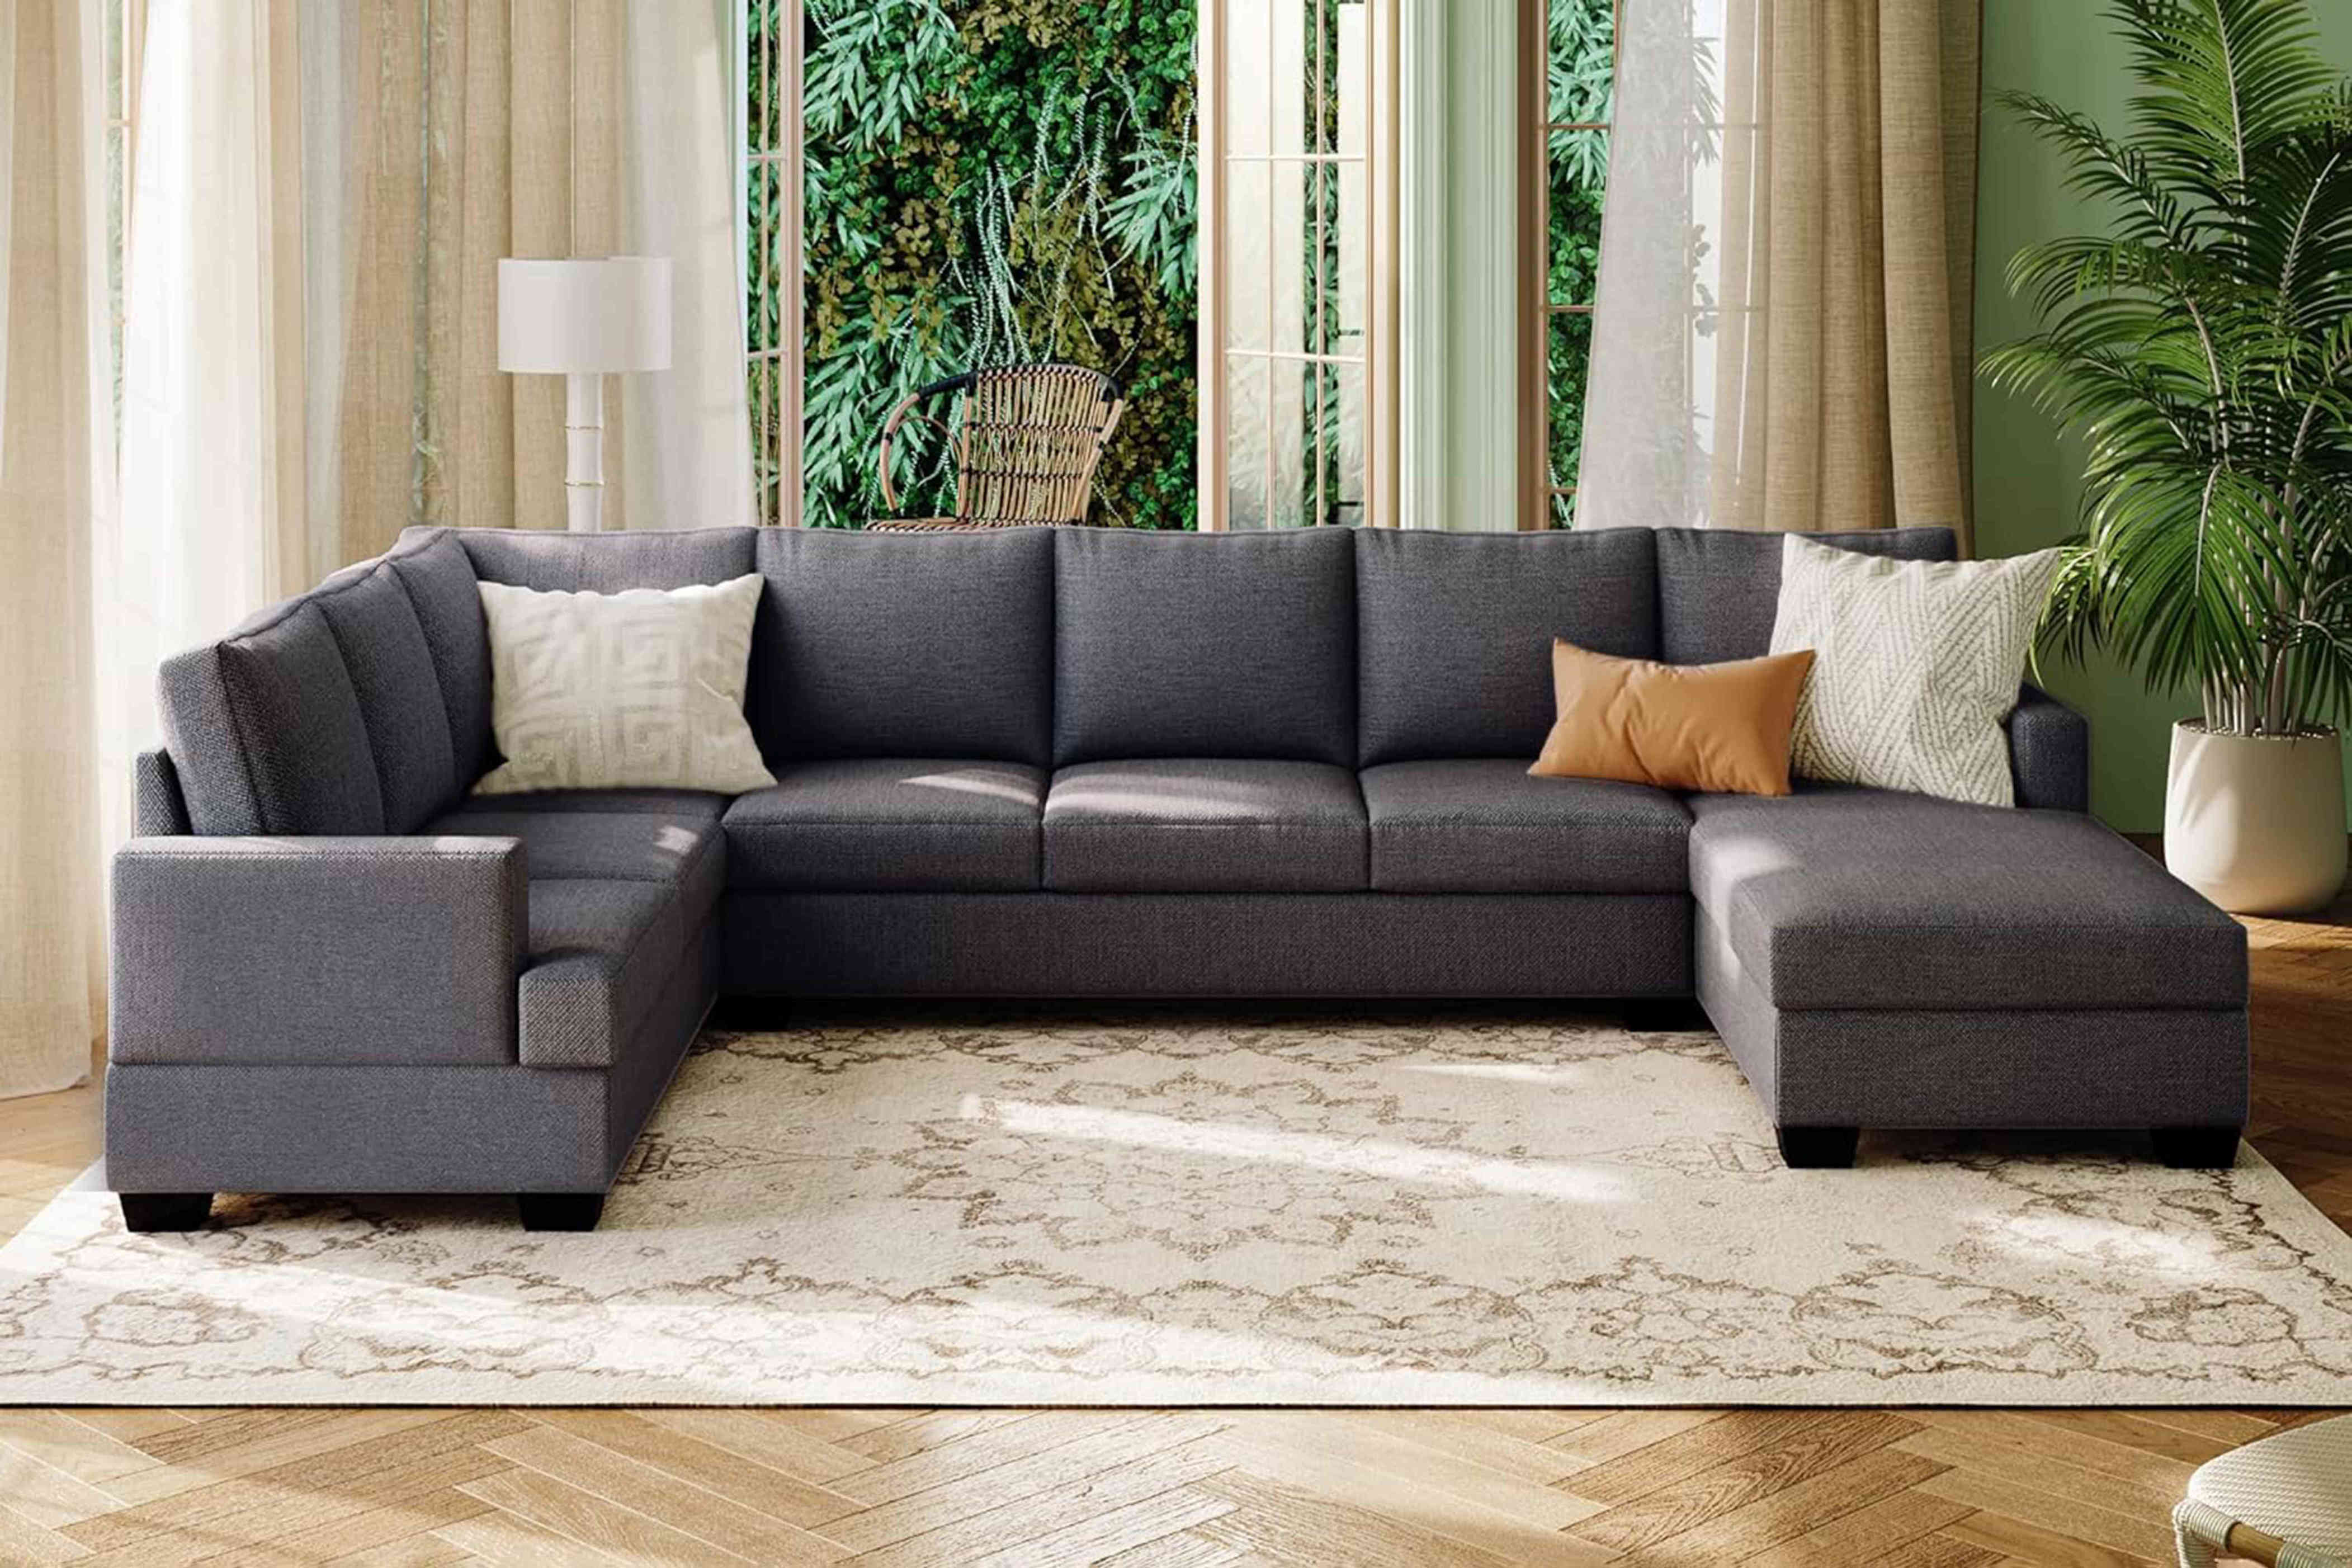 Amazon Has Some of the Best Prices on Sectional Furniture Right Now ...